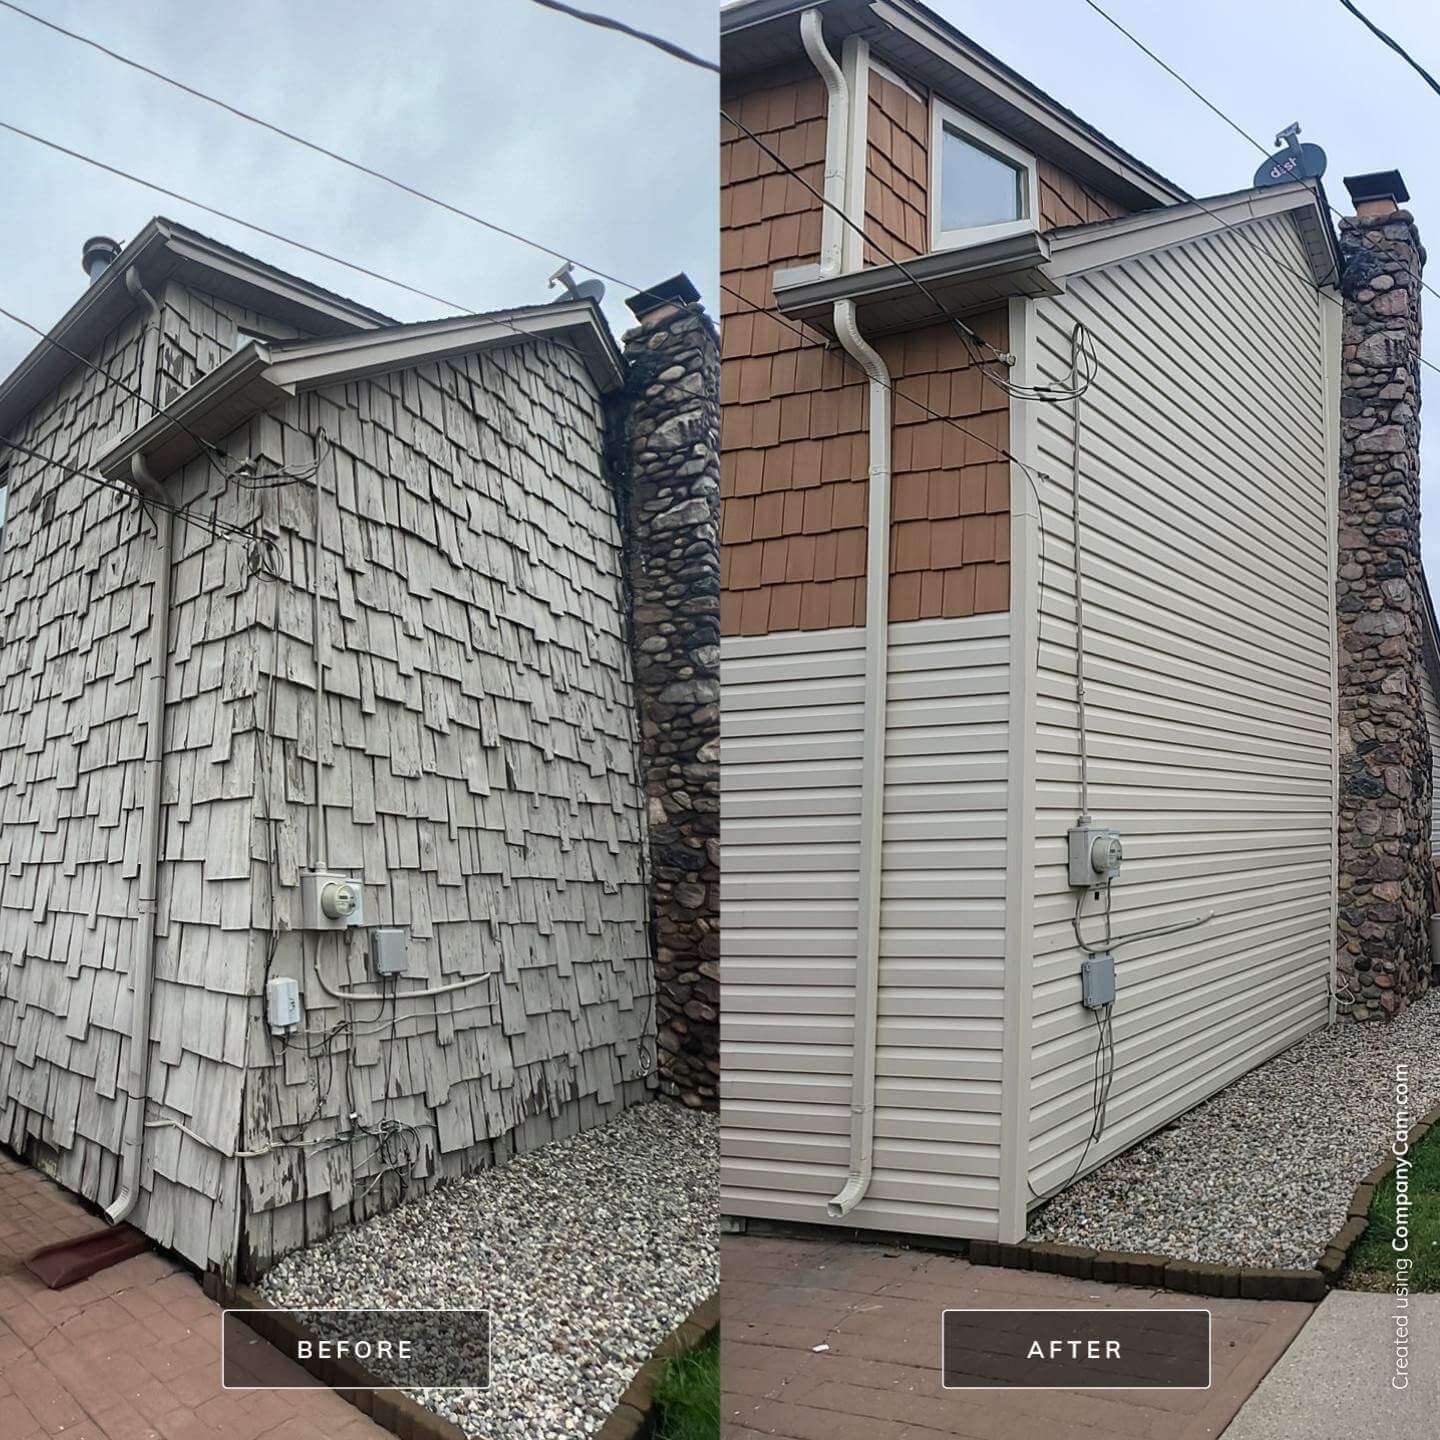 Before and after of a home with new gutters and siding